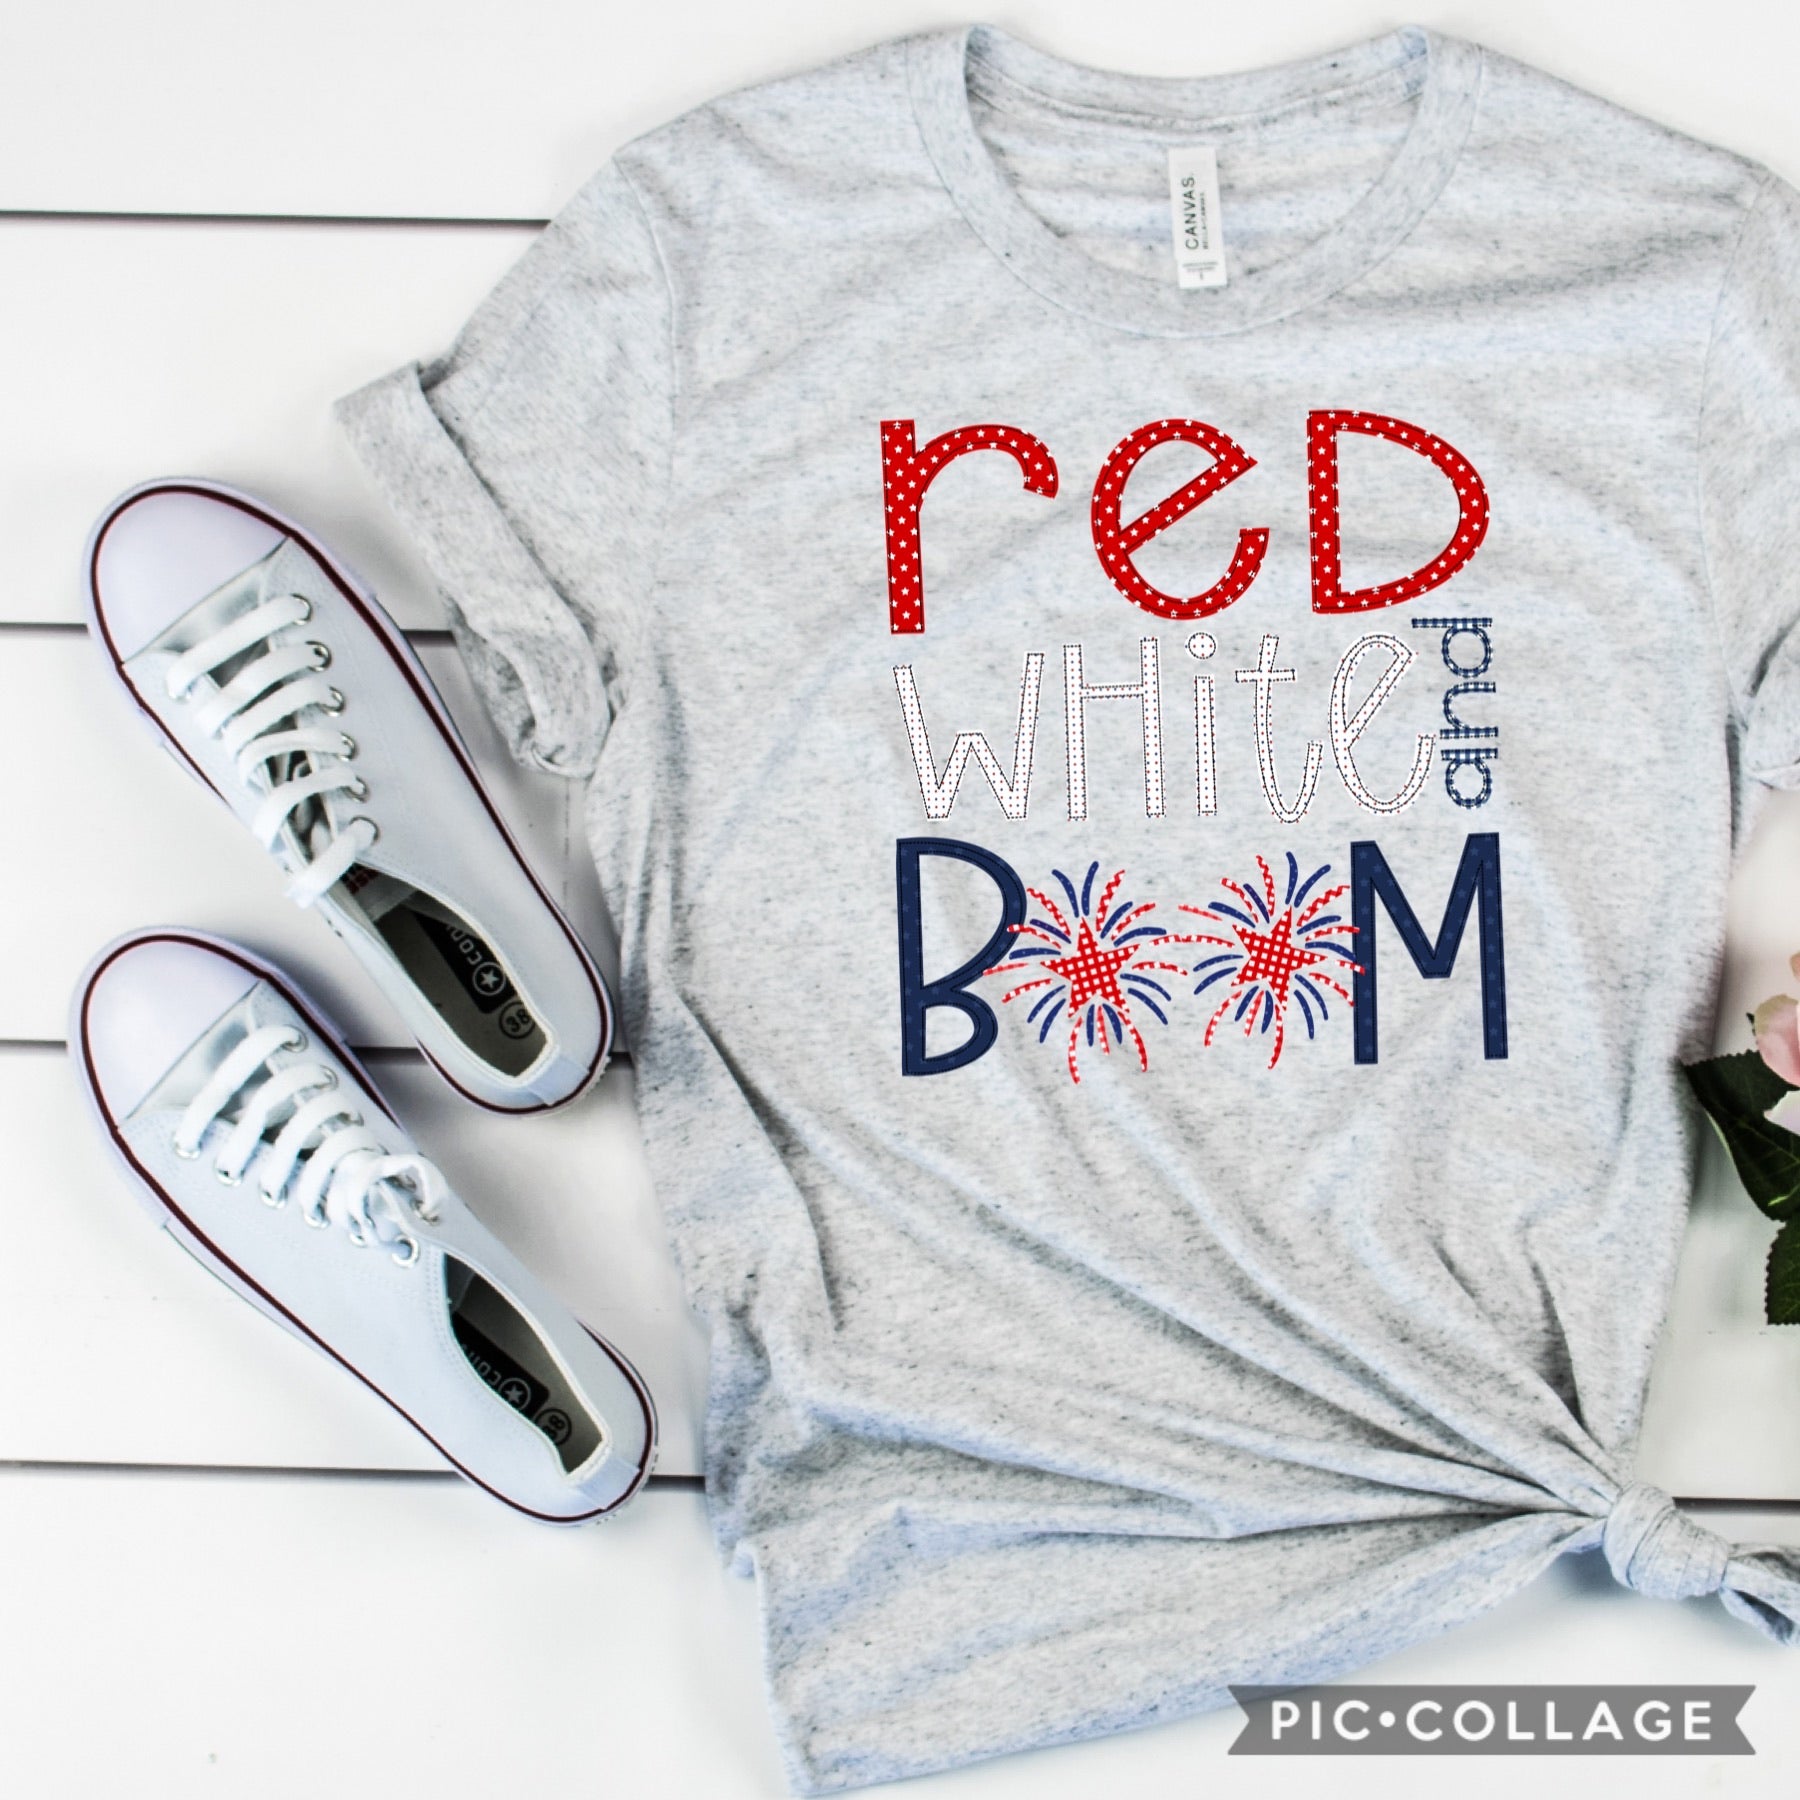 Red white and boom T-shirt